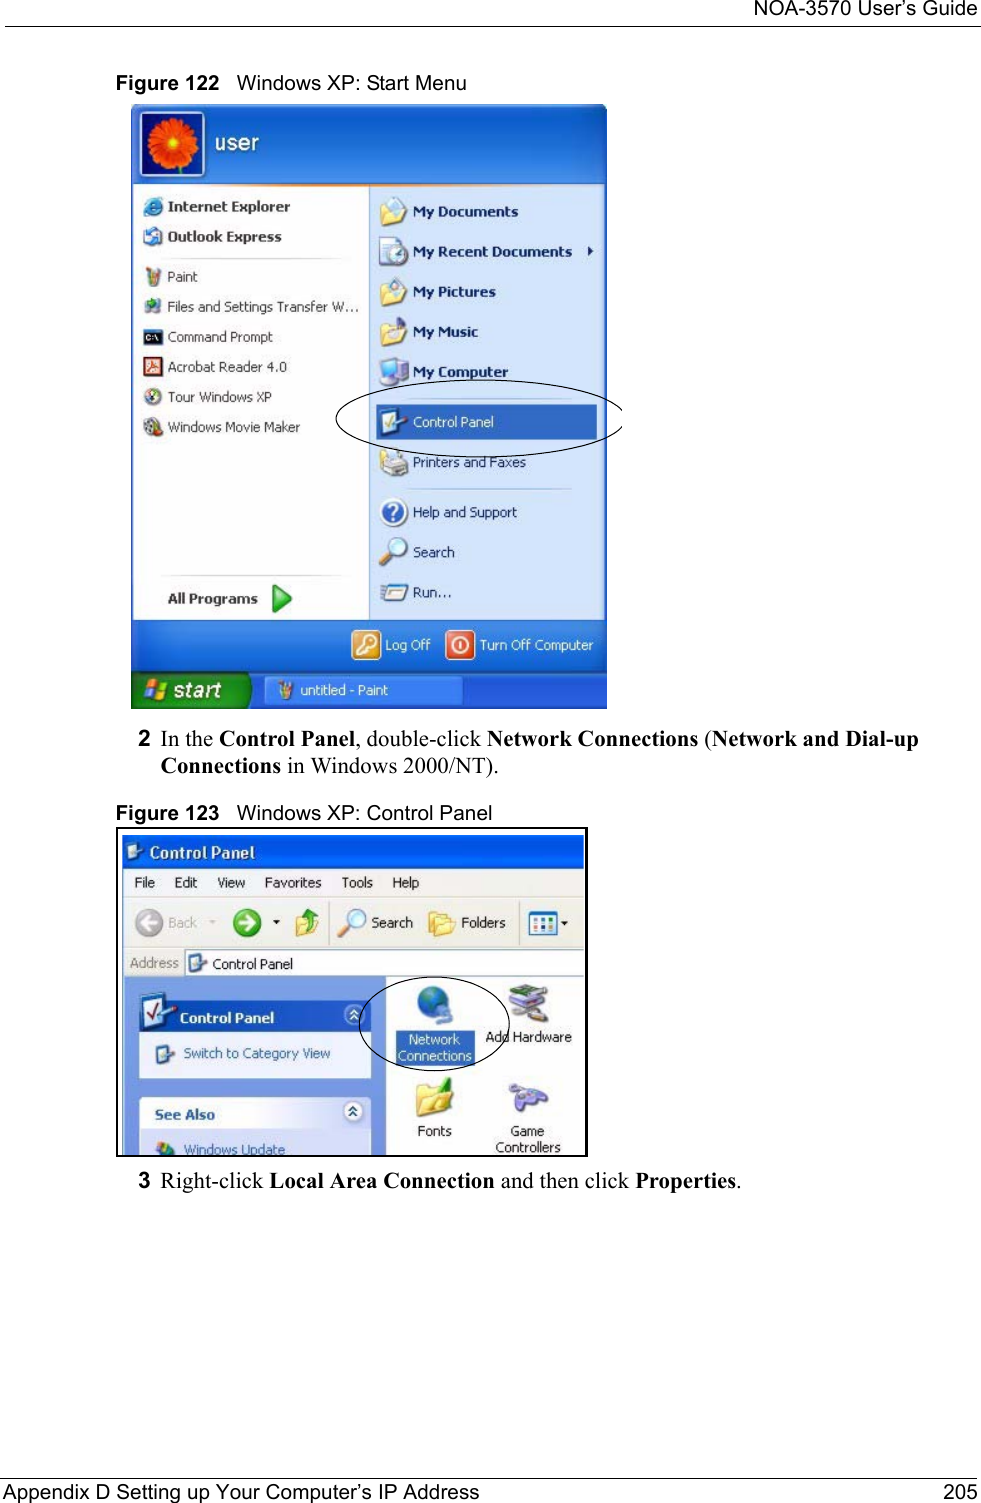 NOA-3570 User’s GuideAppendix D Setting up Your Computer’s IP Address 205Figure 122   Windows XP: Start Menu2In the Control Panel, double-click Network Connections (Network and Dial-up Connections in Windows 2000/NT).Figure 123   Windows XP: Control Panel3Right-click Local Area Connection and then click Properties.